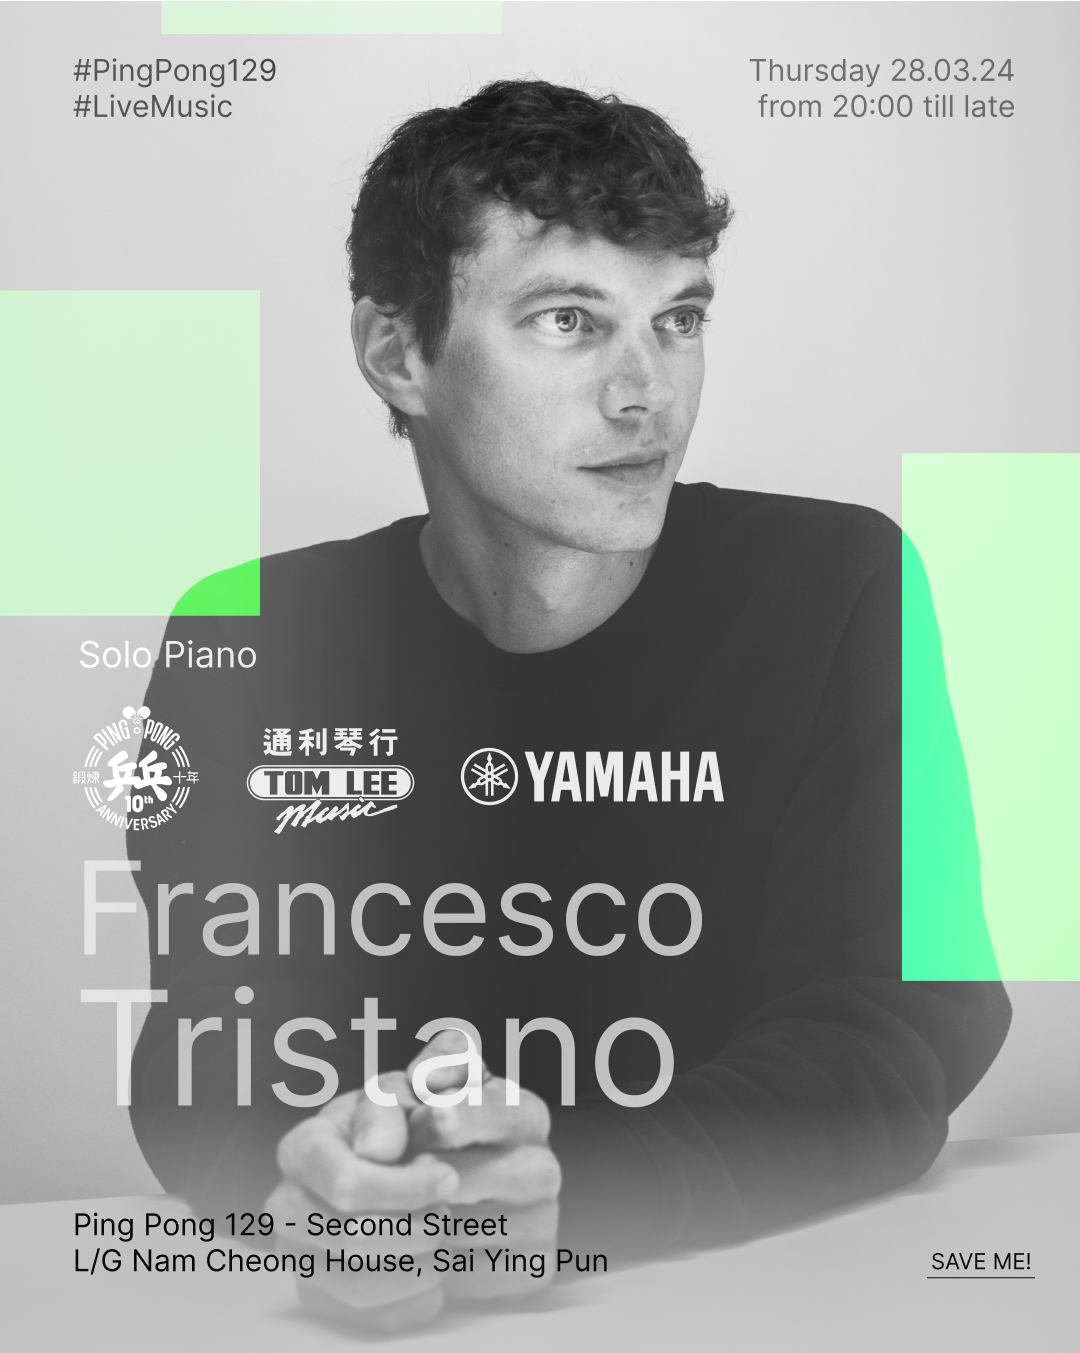 Francesco Tristano - 10 Years of Ping Pong 129 - Página frontal